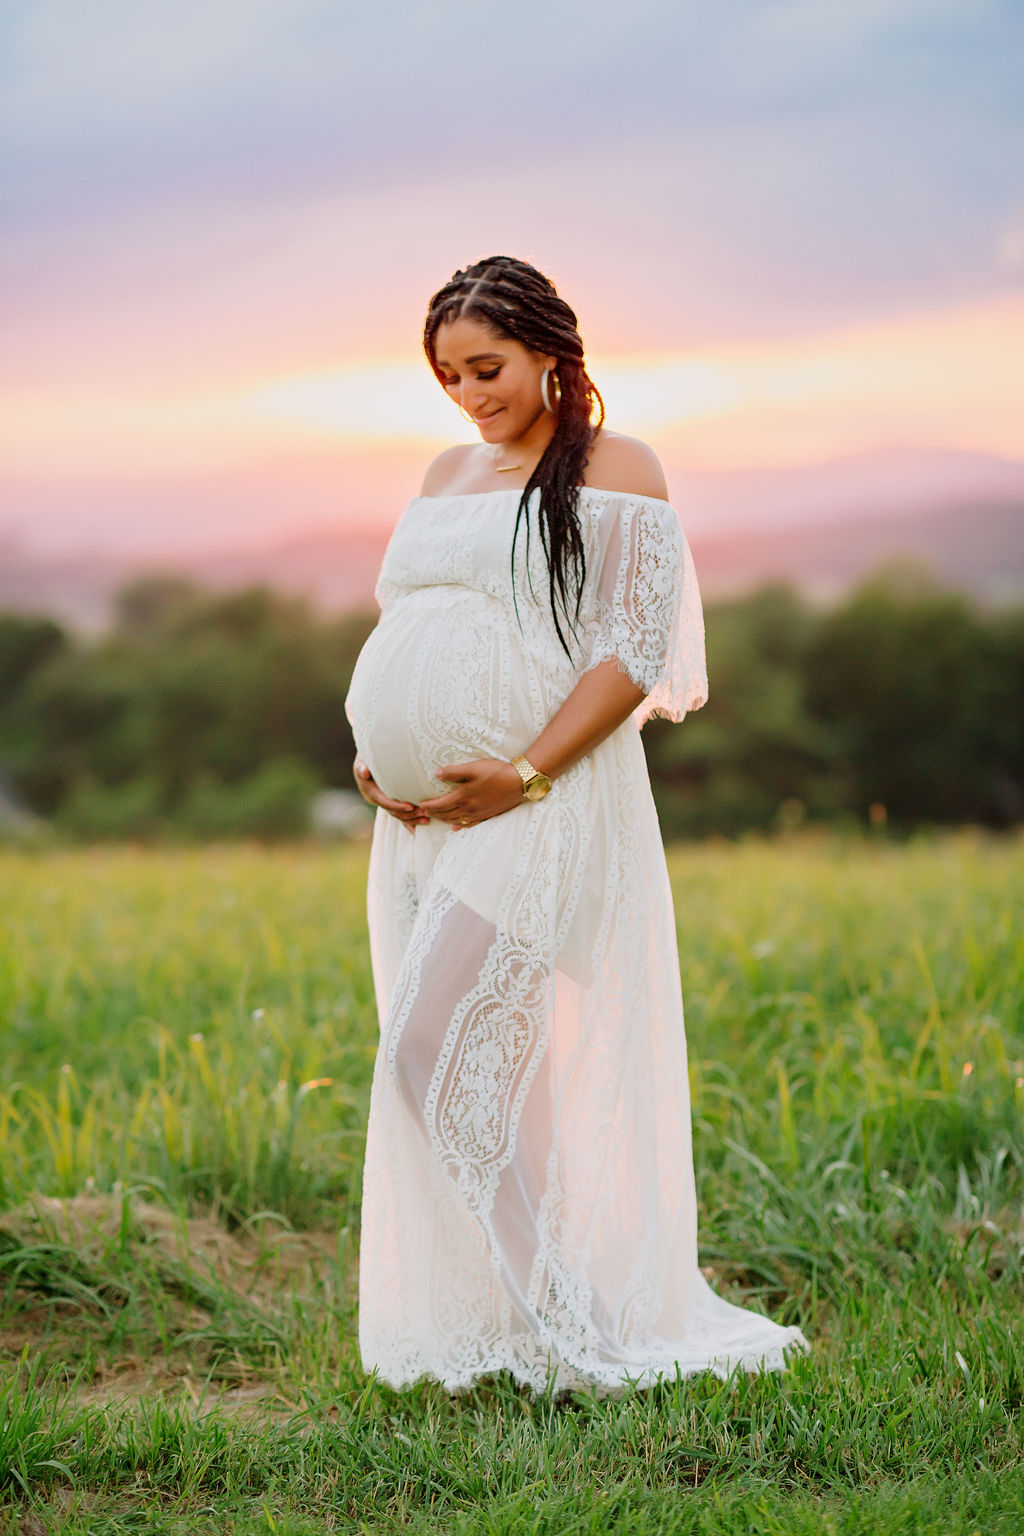 Mother to be stands in a grassy field in front of a vibrant sunset prenatal massage harrisonburg va